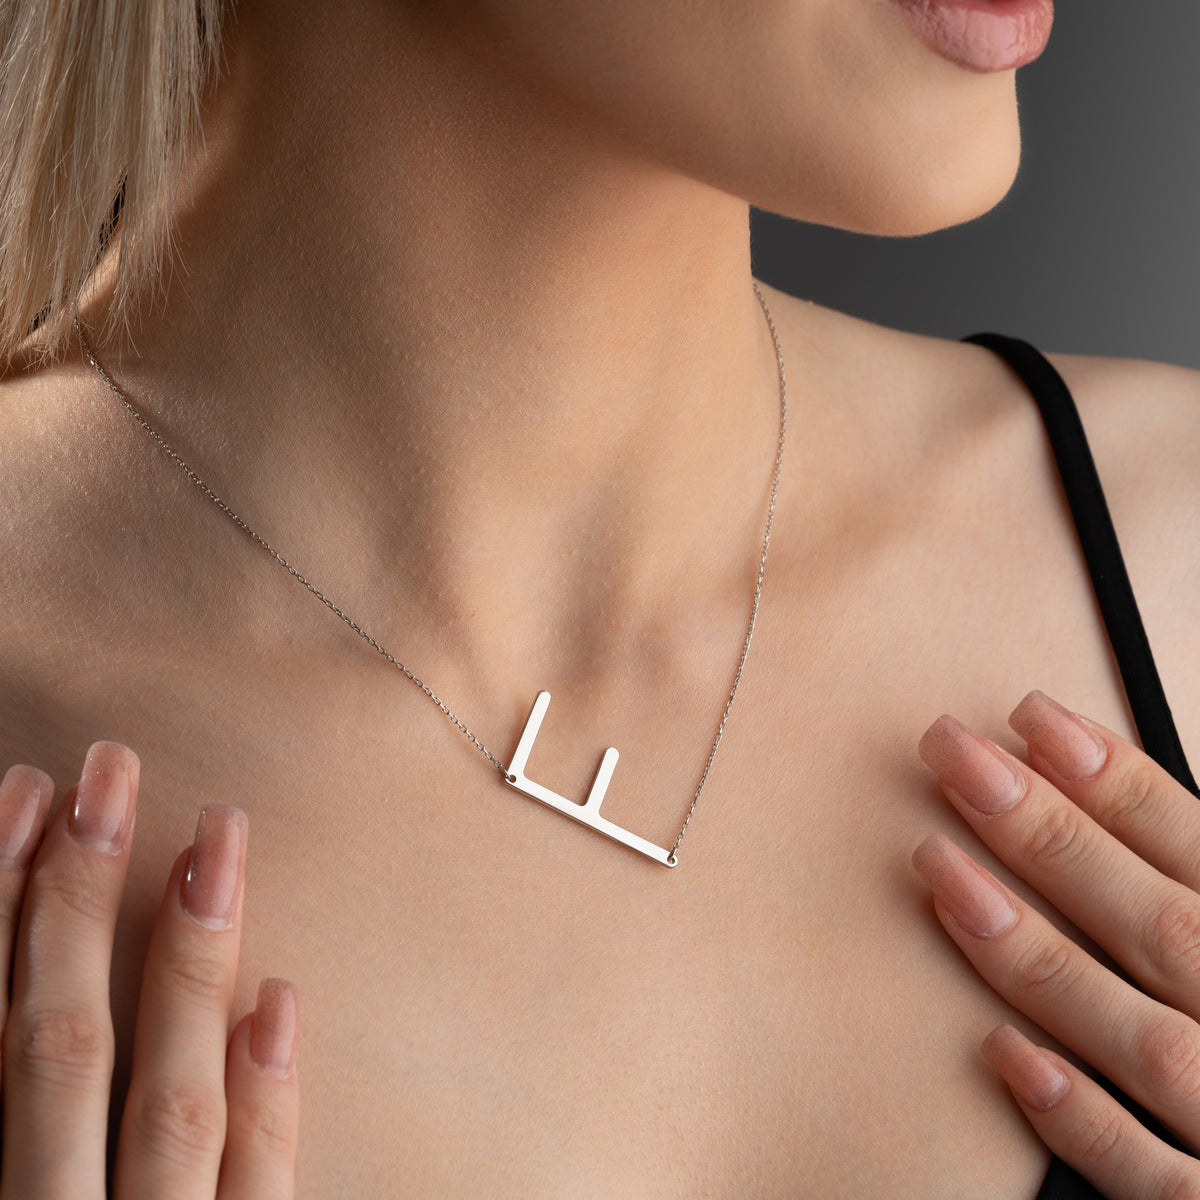 Large Sideway Initial Necklace in Sterling Silver